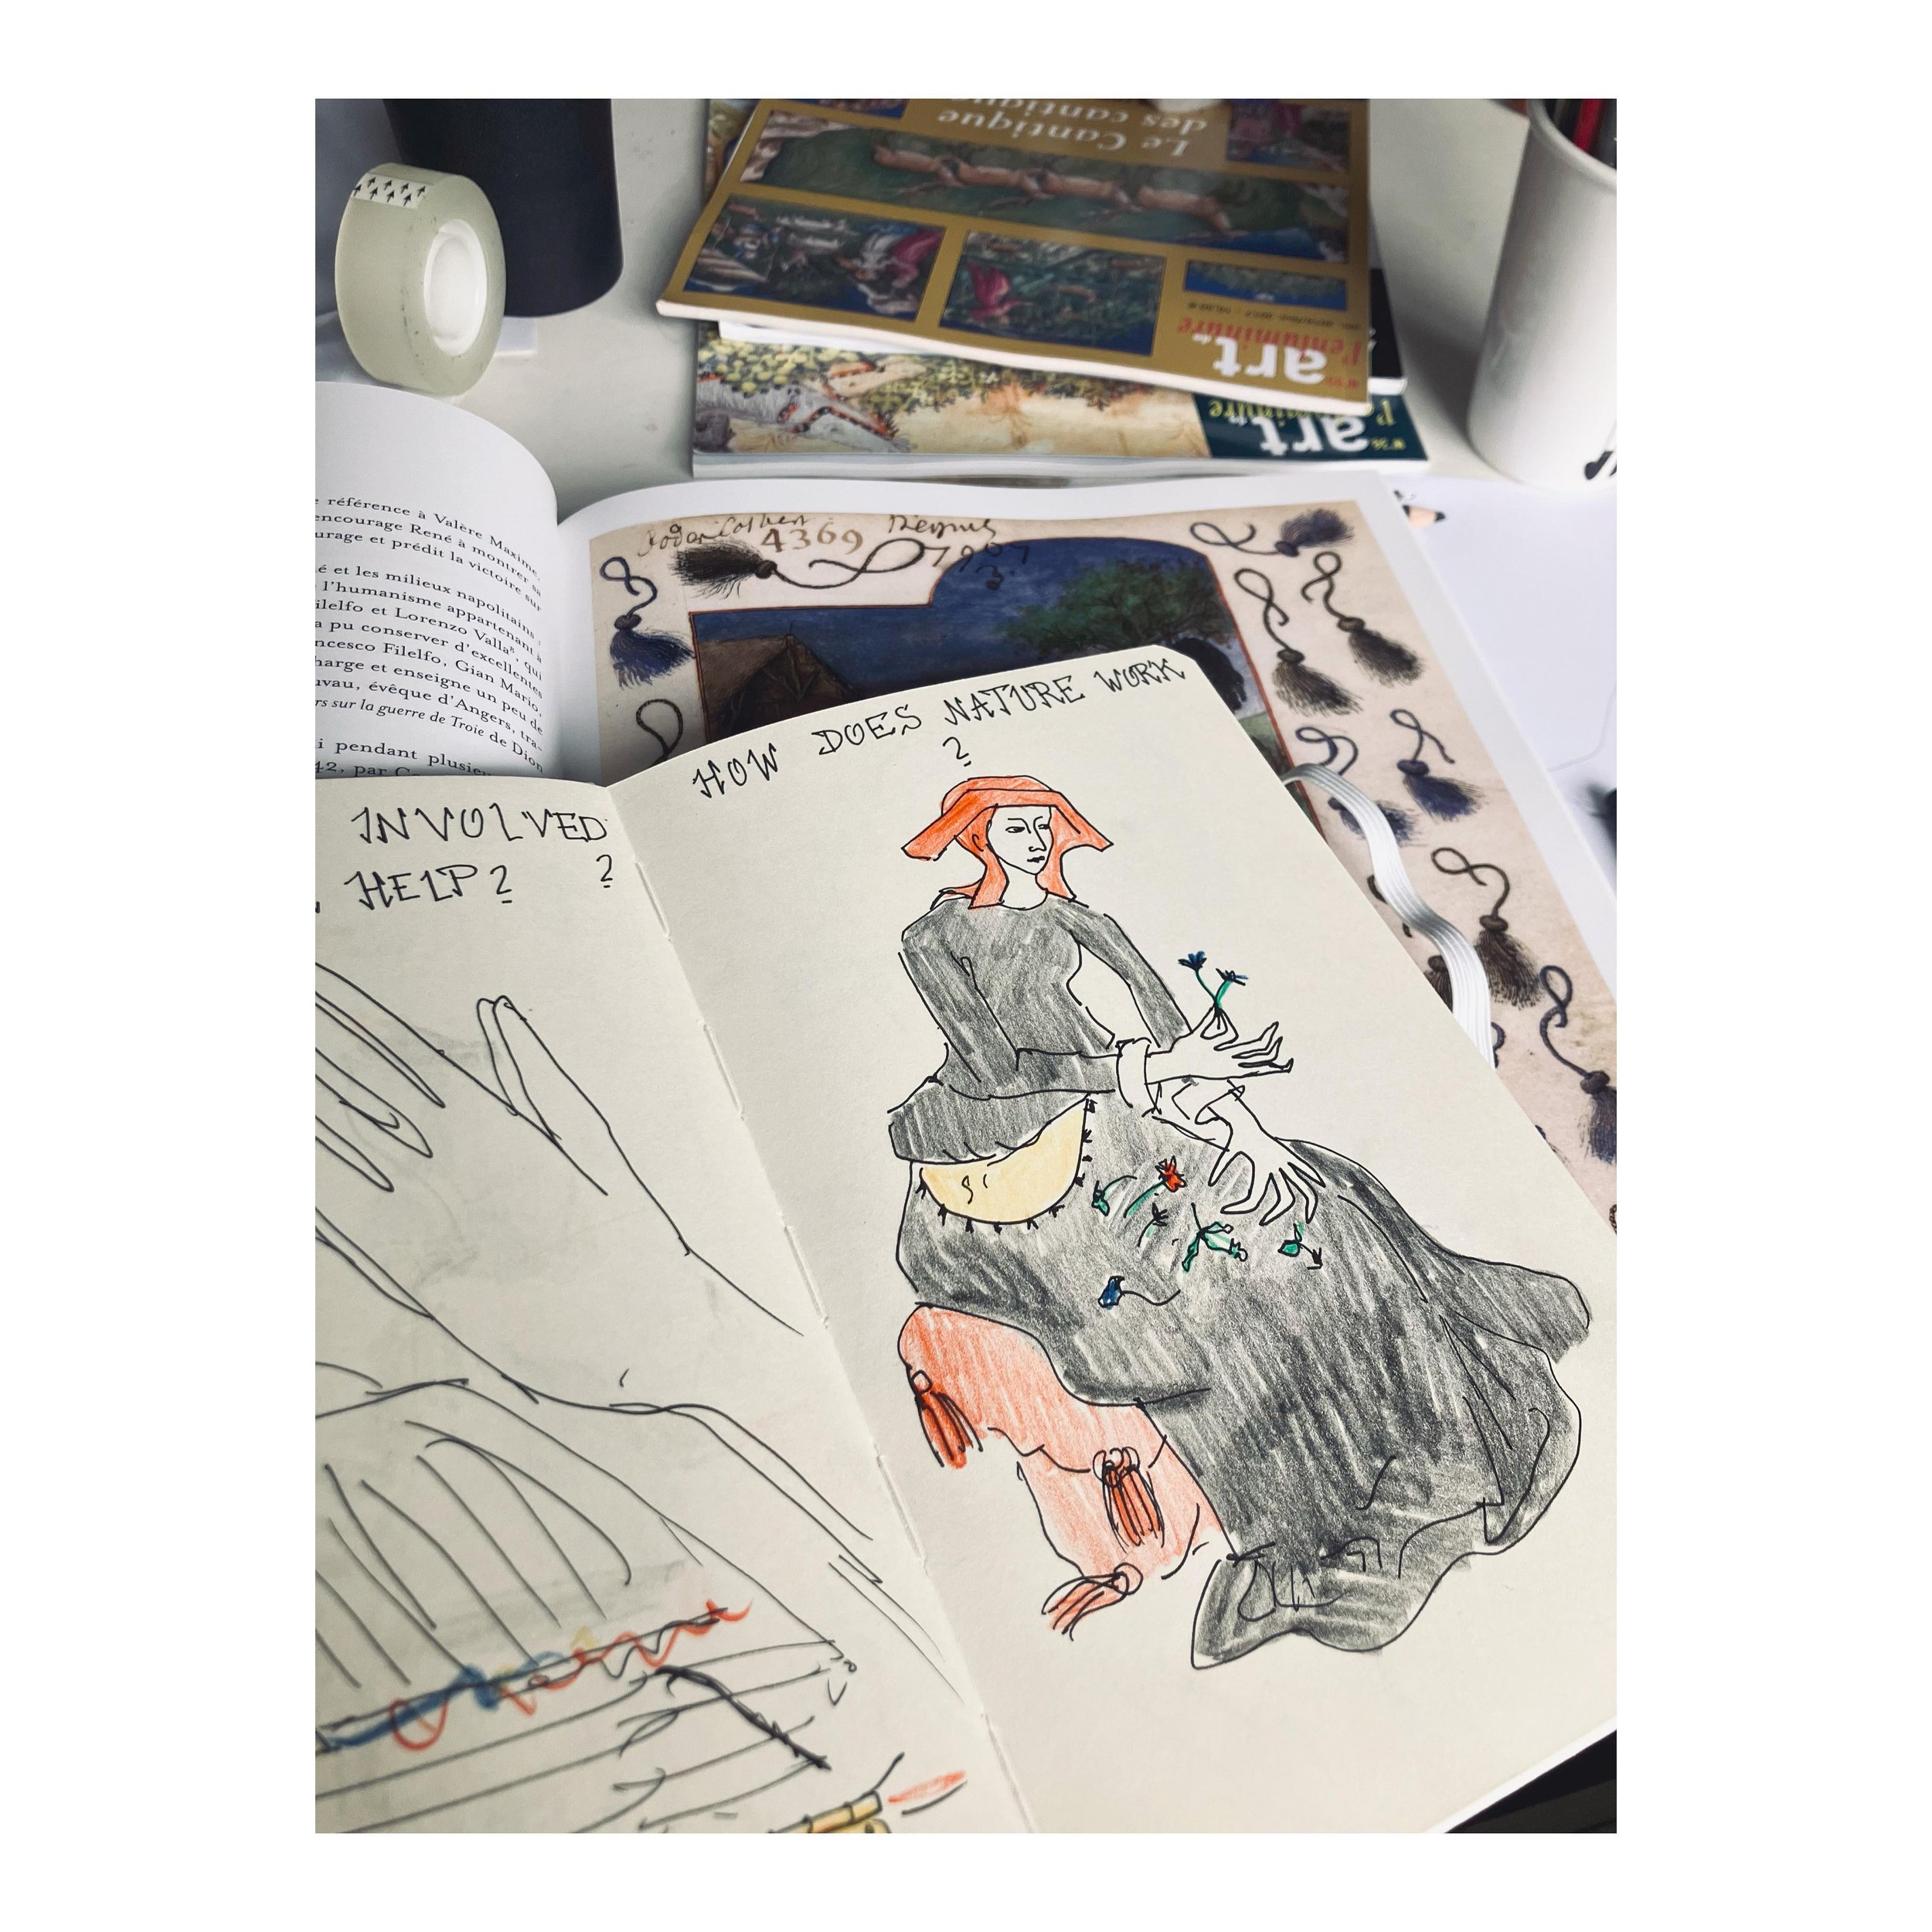 Researching and sketching today.

#research #sketching #medievalinspired #illustratorsketchbook #reproductivebodies #historyillustration #understandingreproduction #romanceandreproduction #historylovers #lovers #justlovers #artandhistory #misconcepti